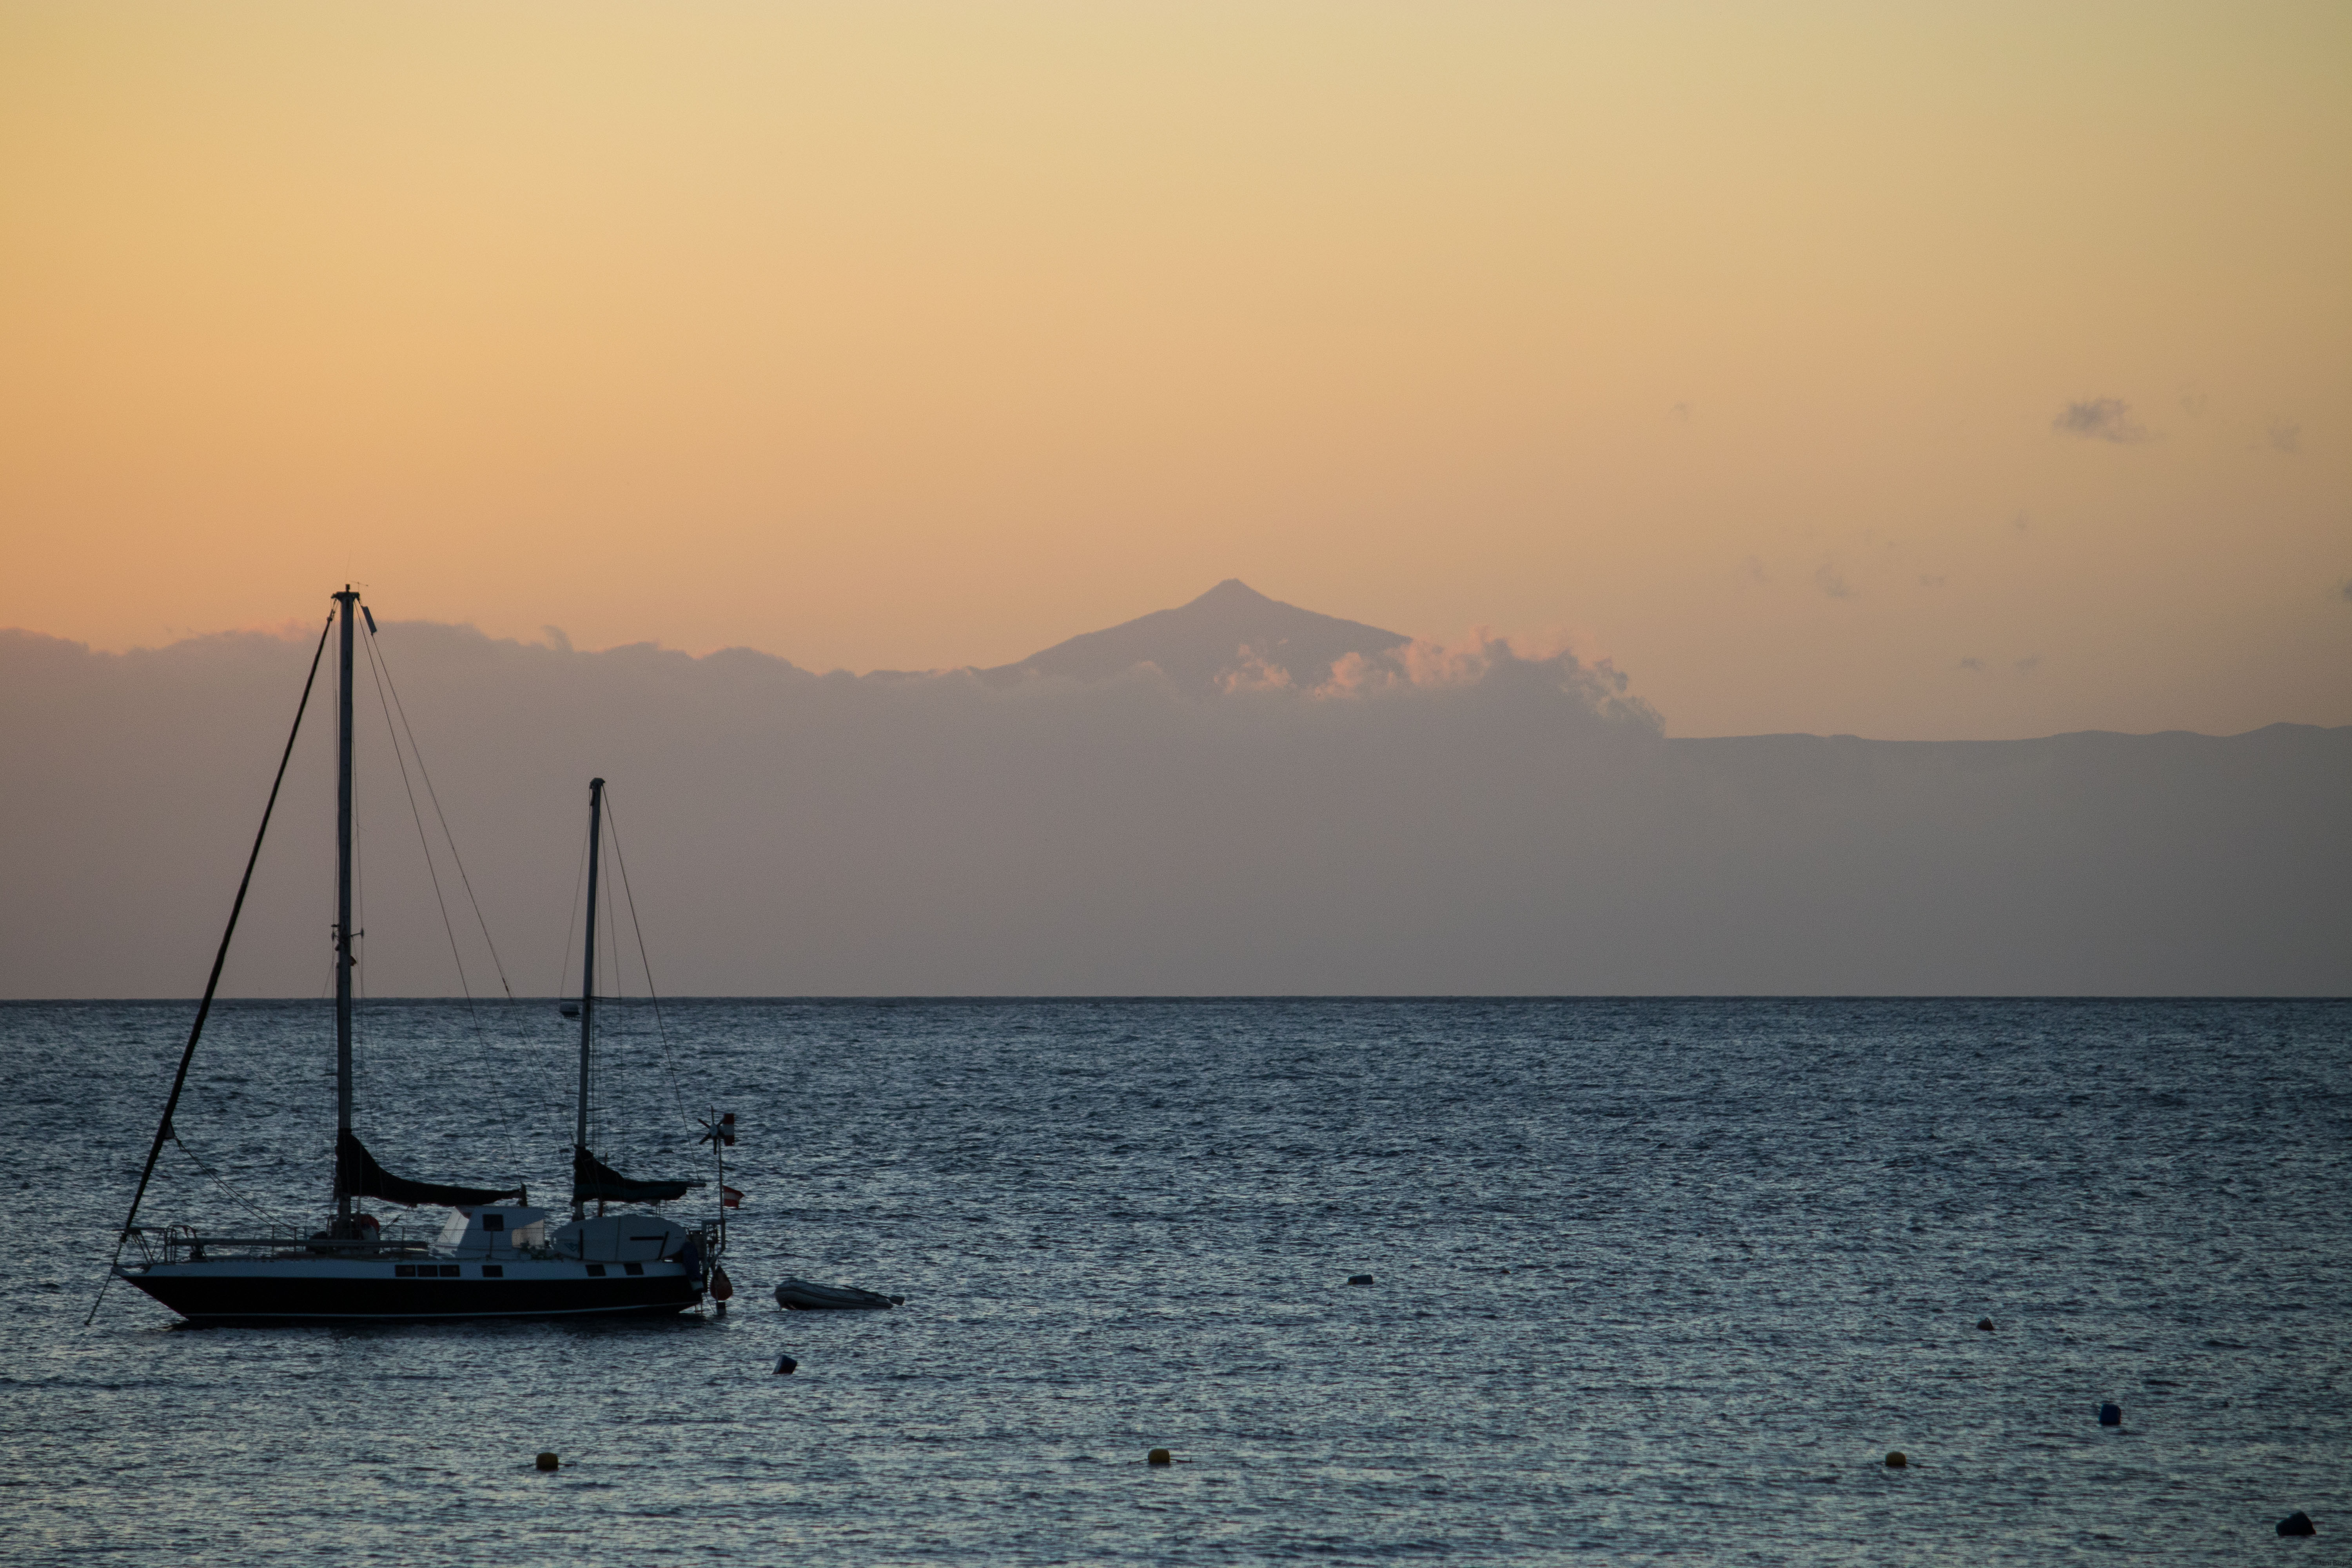 The only day we could see, volcano on the neighboring island Tenerife. I think it's around 4.000m high.